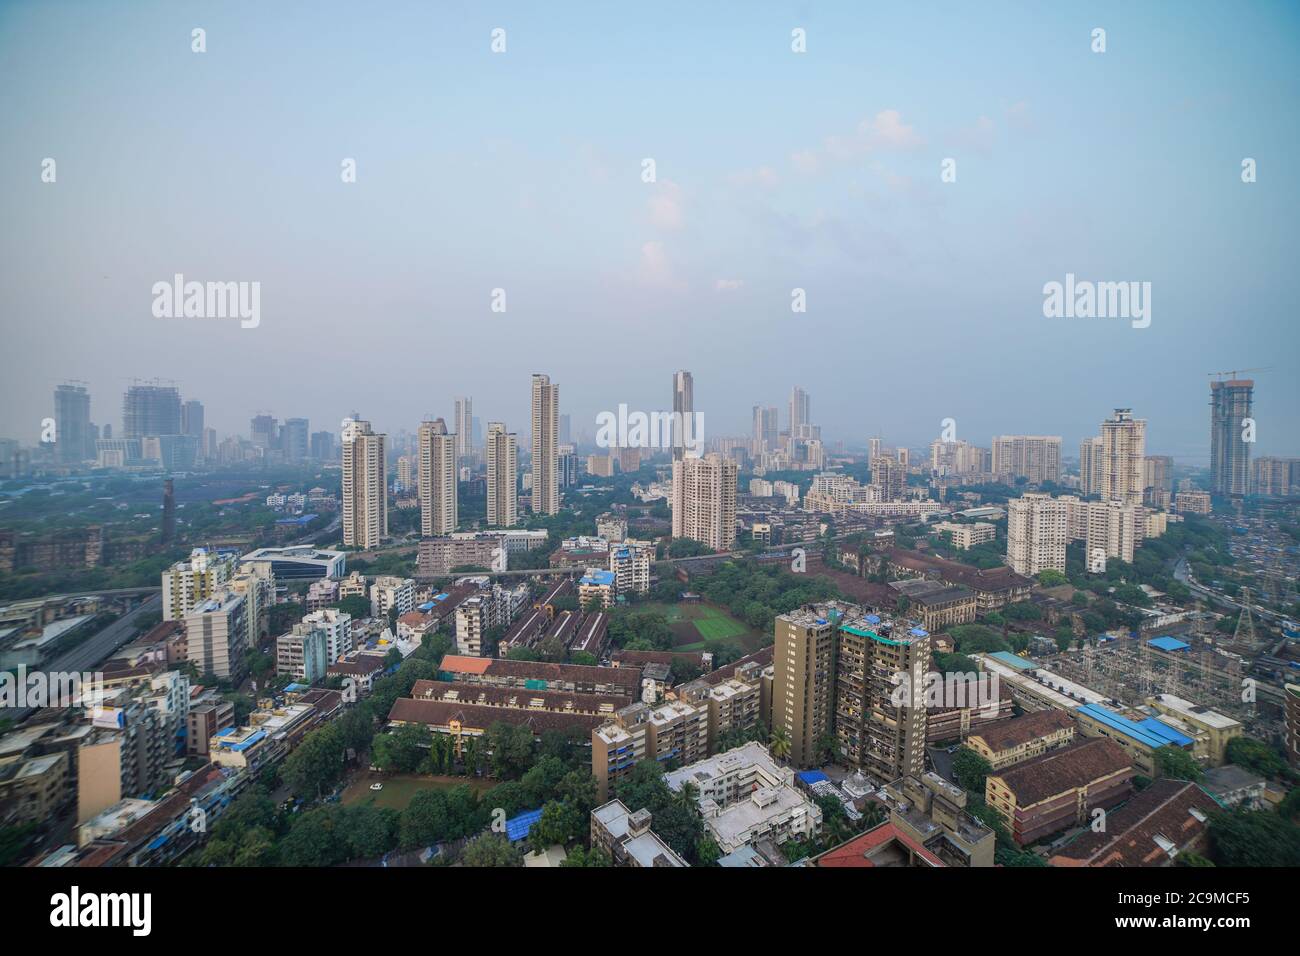 Mumbai Arial View Tall Buildings (Bombay) Monorail Arial Route 2020 Stock Photo